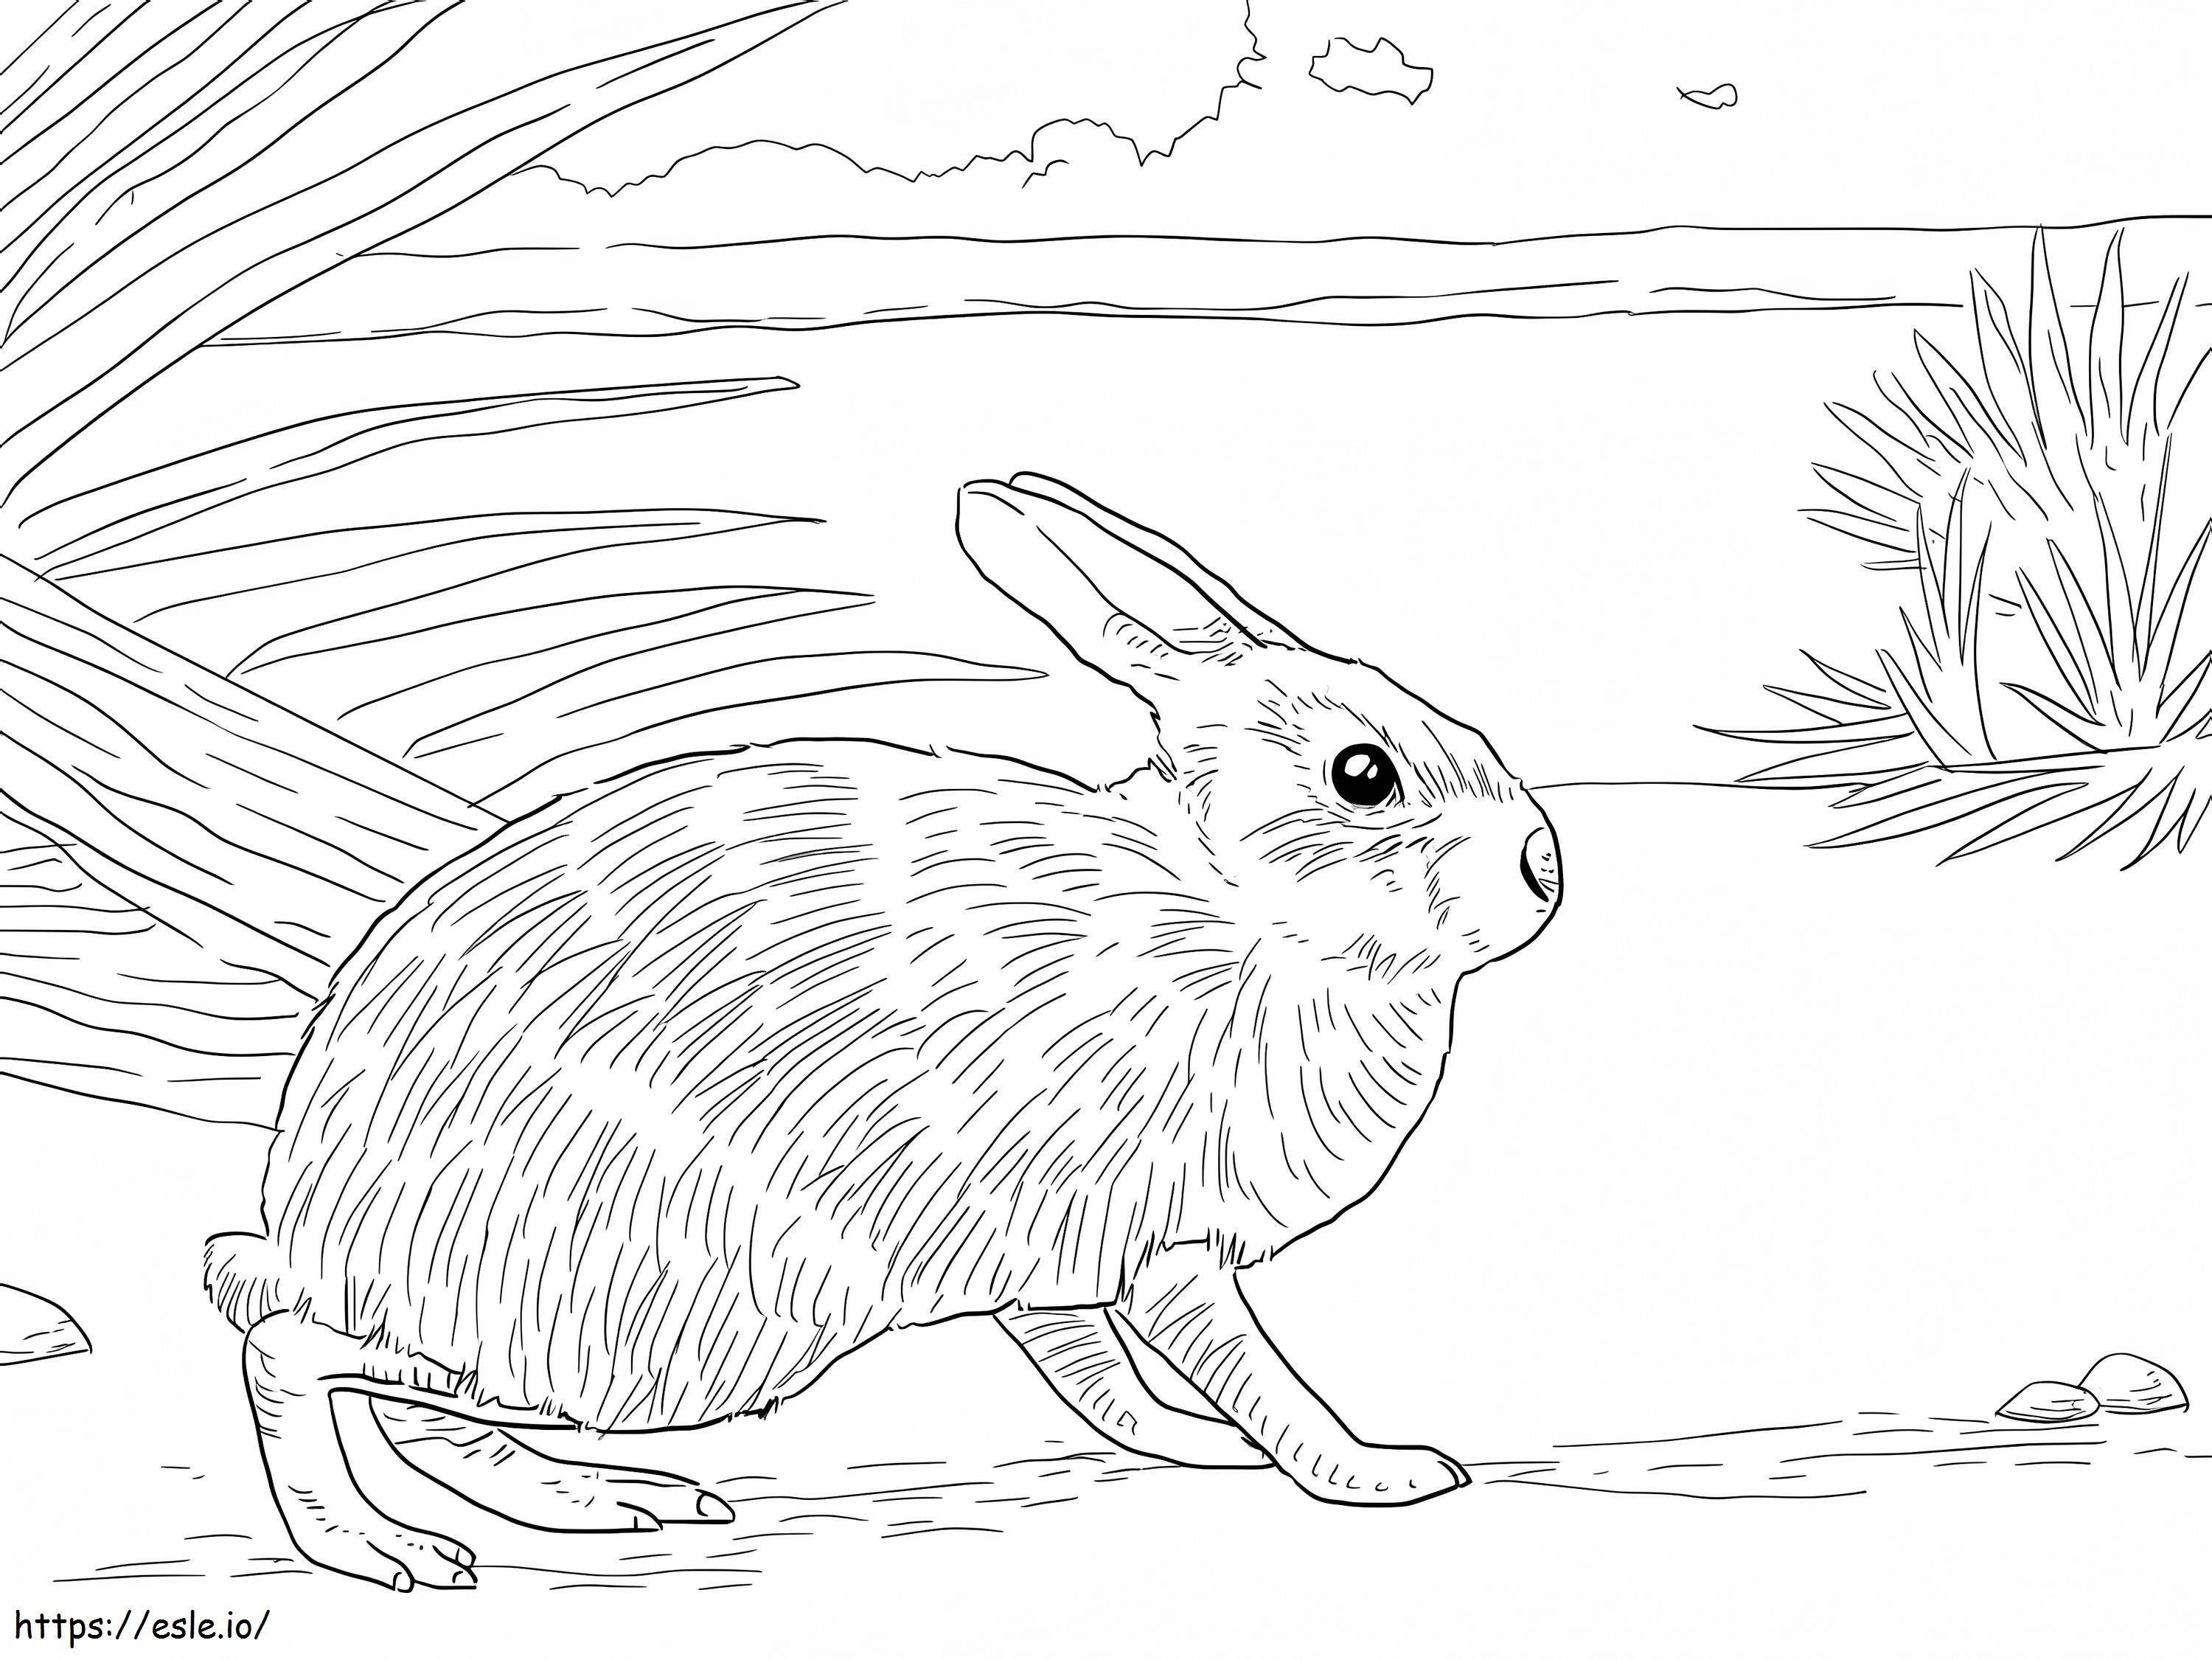 Marsh Rabbit coloring page